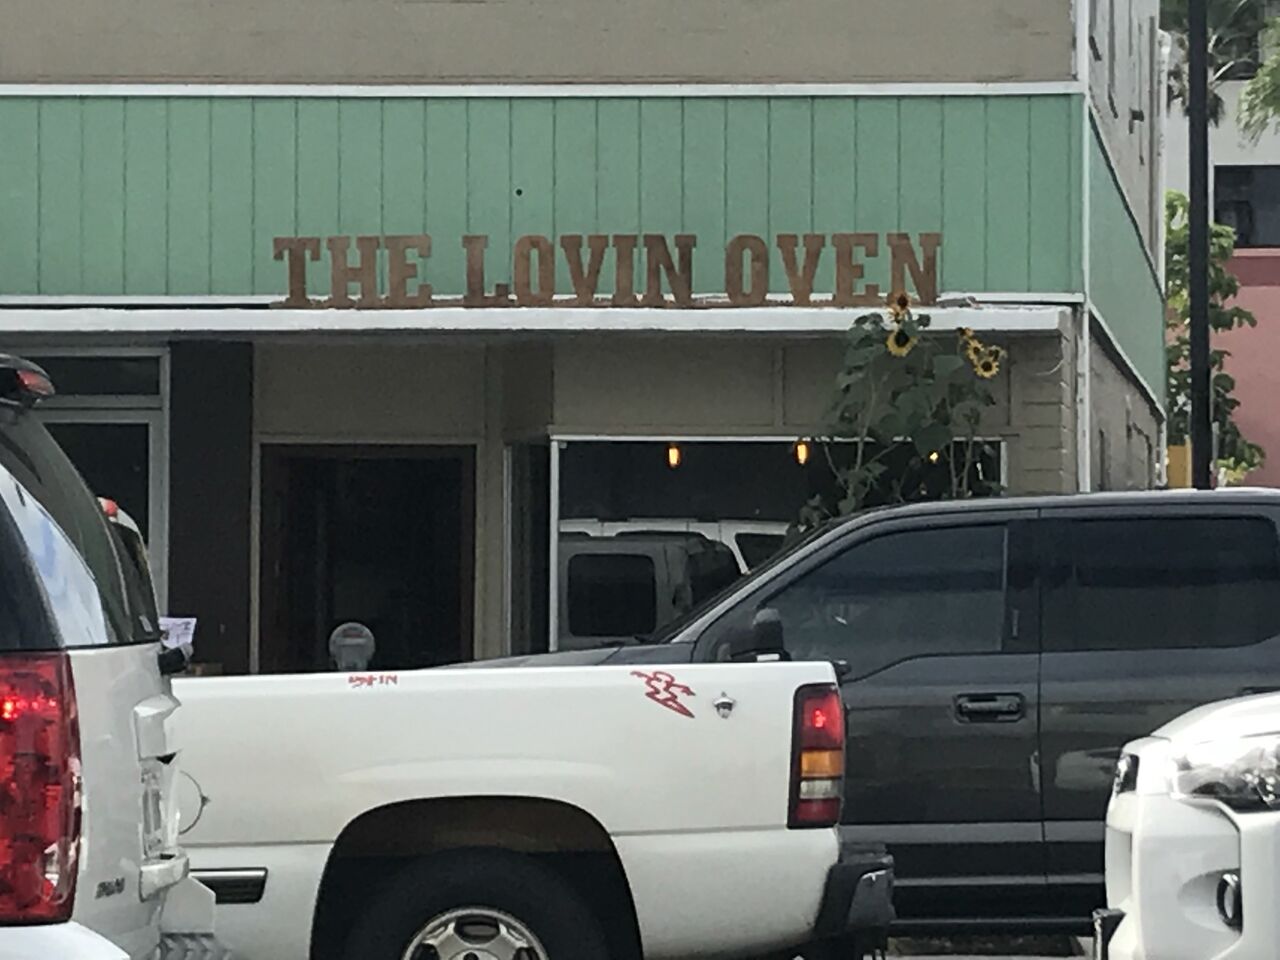 A photo of The Lovin' Oven